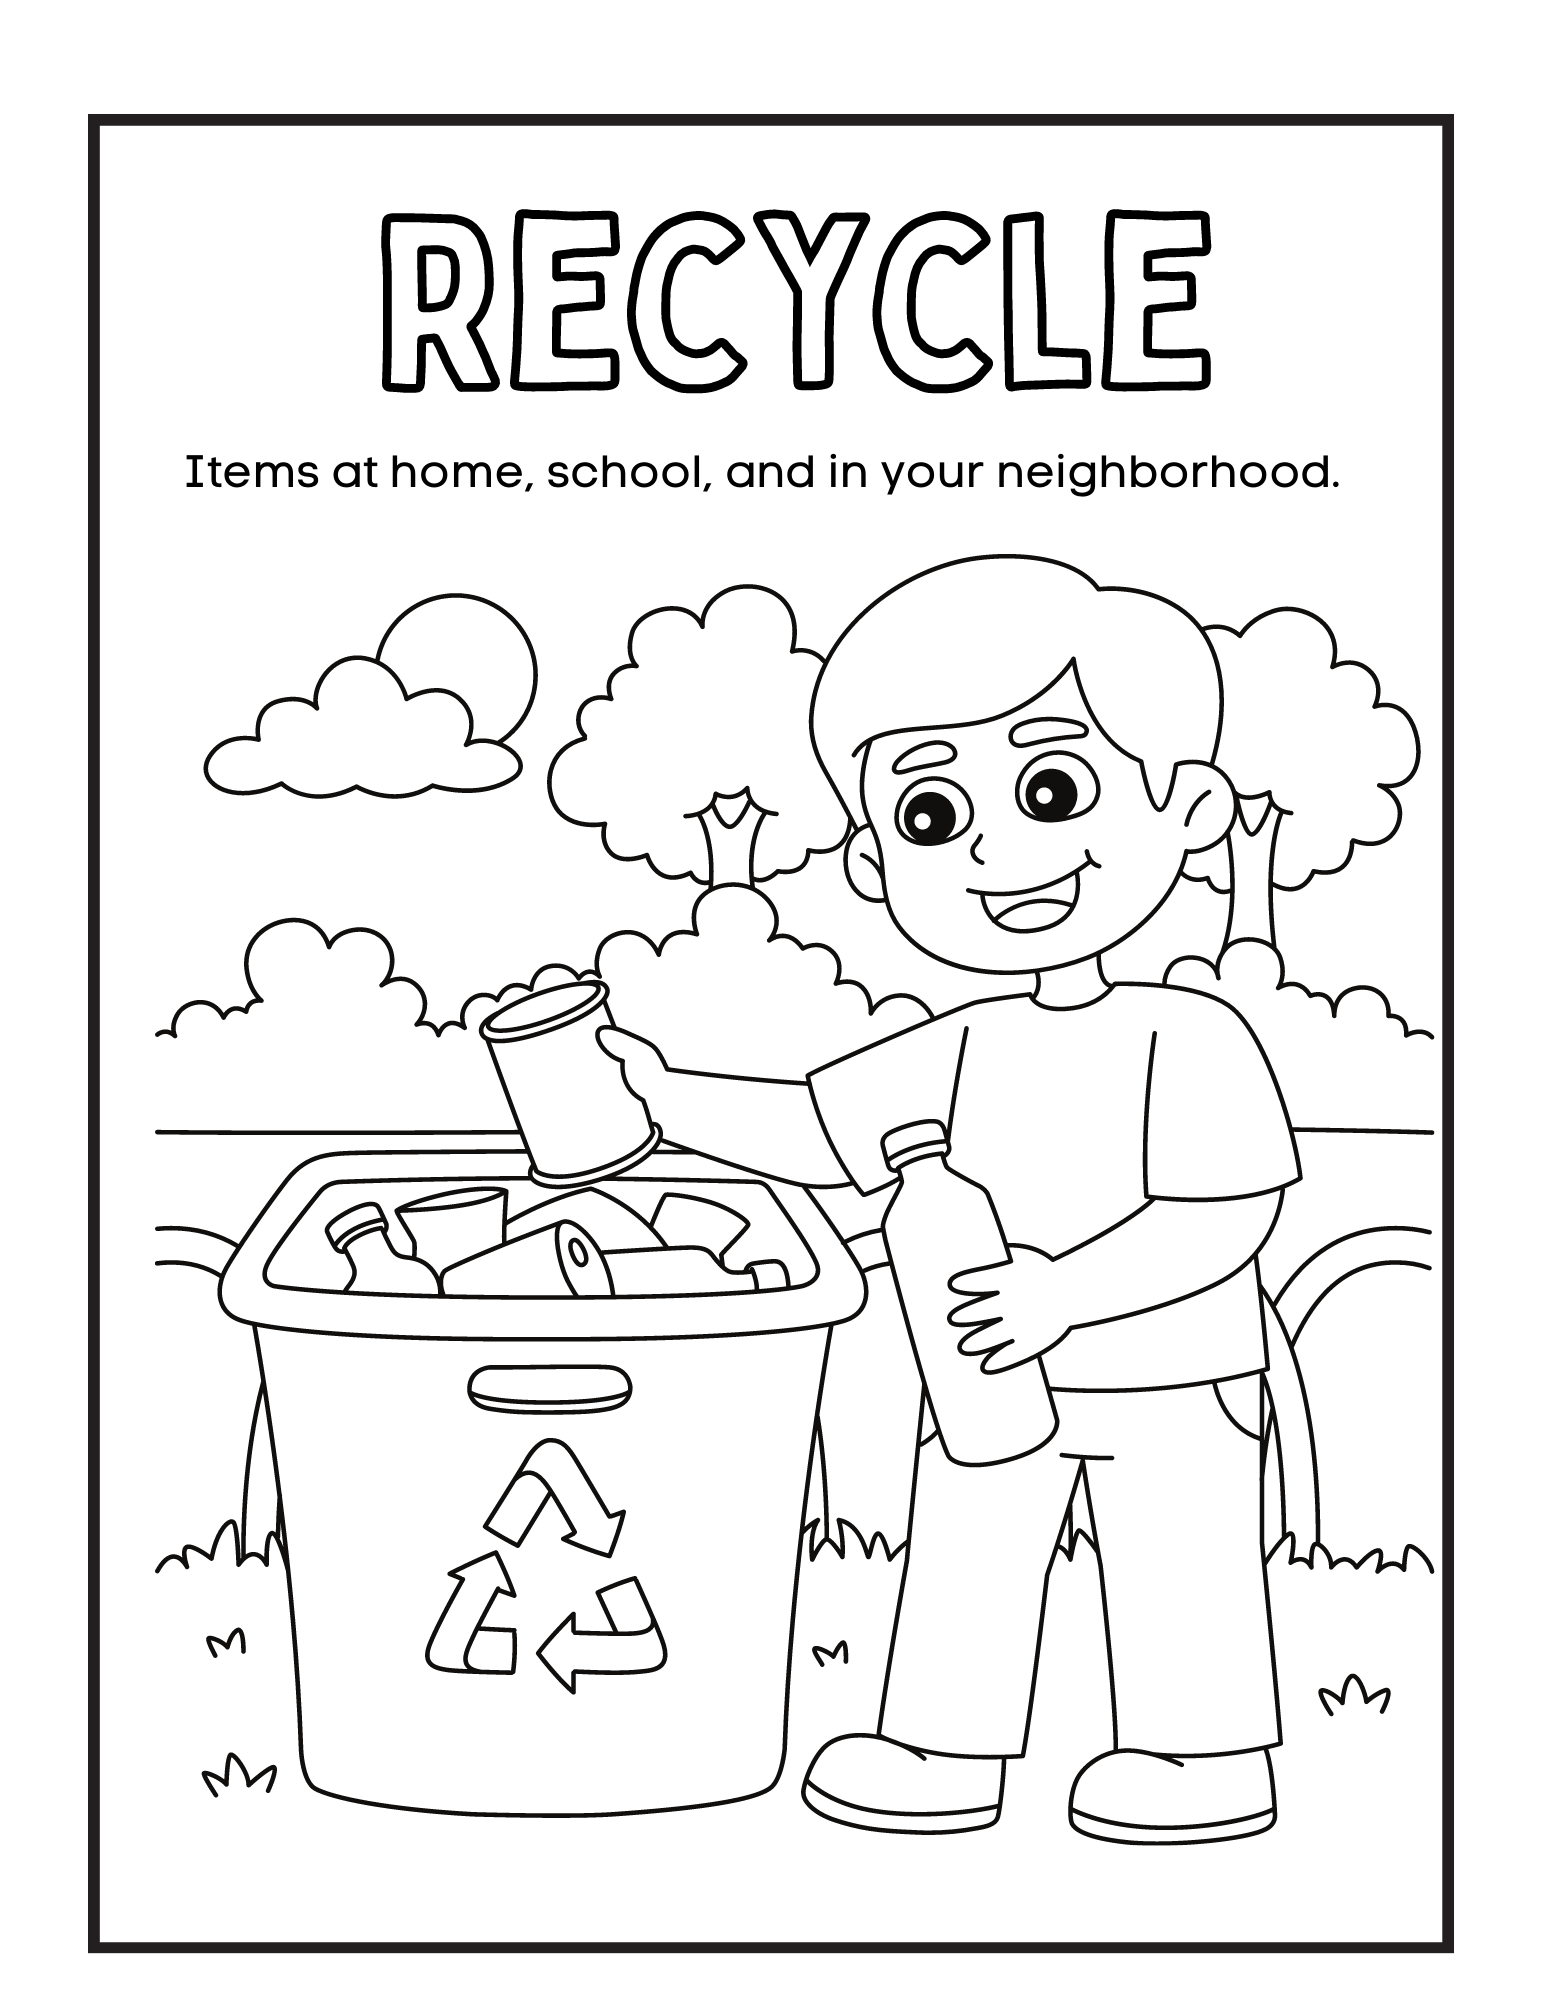 Reduce, Reuse, Recycle Coloring Pages FREE — xoxoerinsmith.com